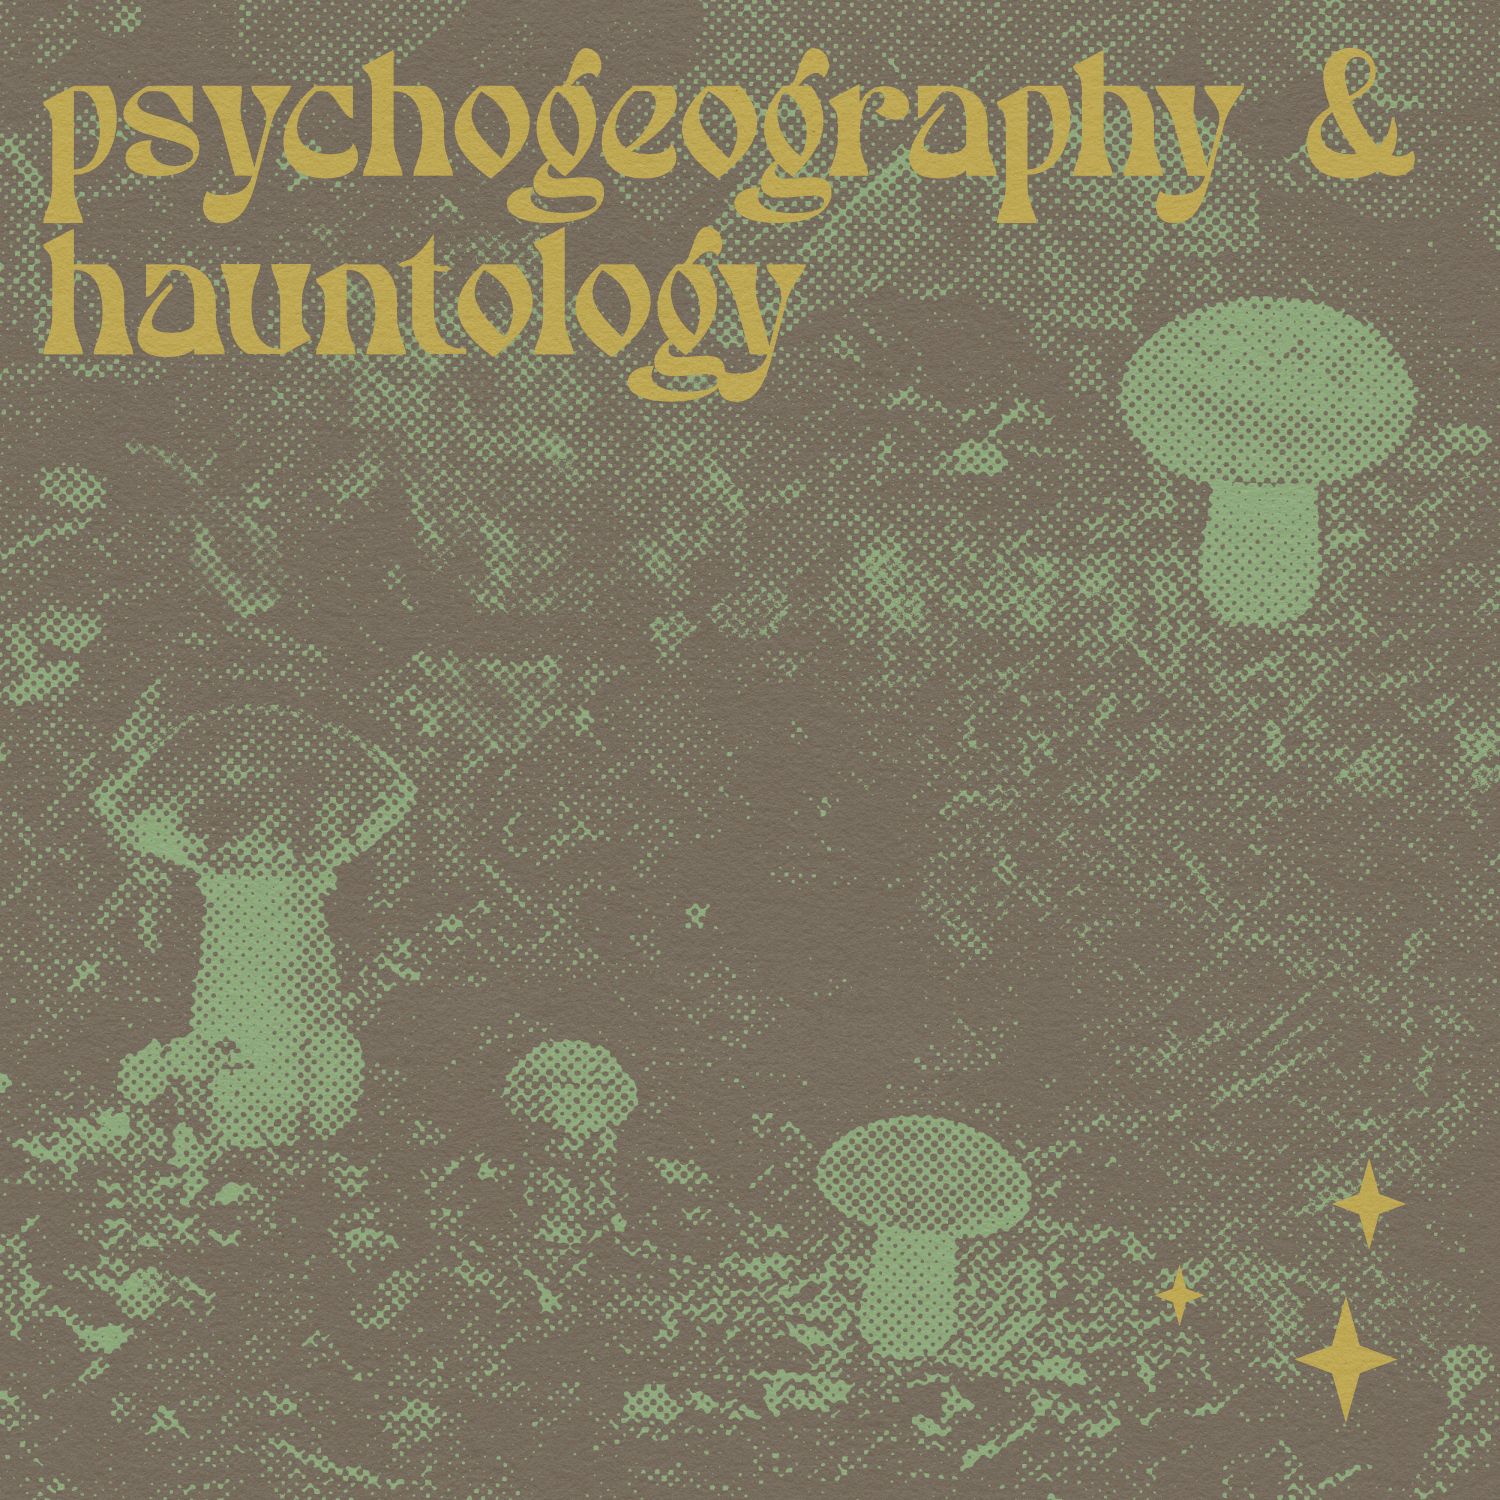 a green and gray halftone photograph of mushrooms with the words "psychogeography & hauntology"